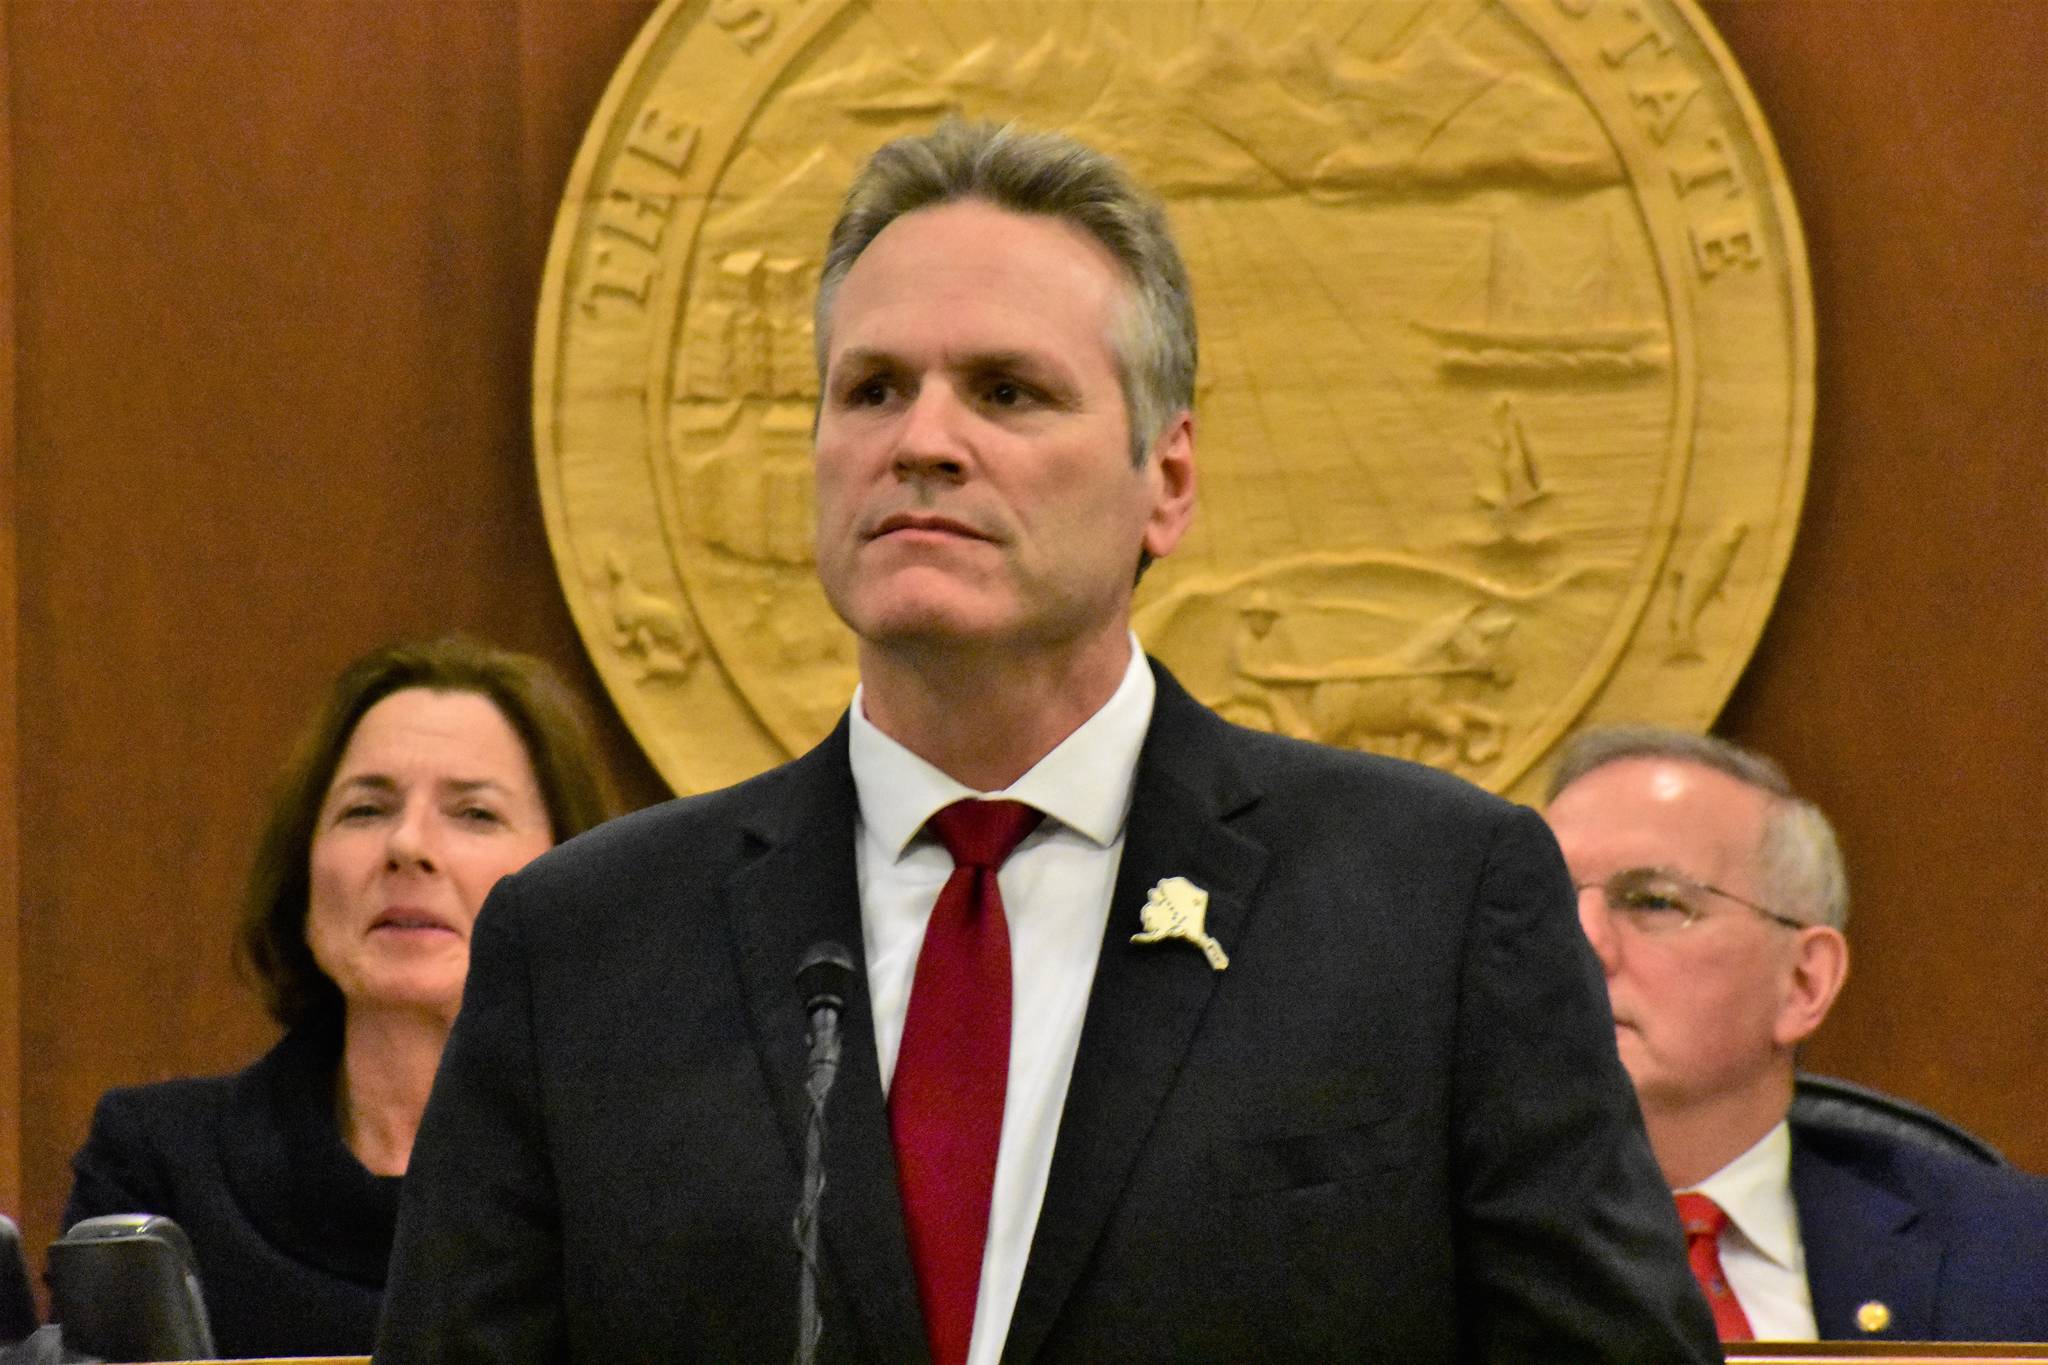 Gov. Dunleavy’s State of the State address